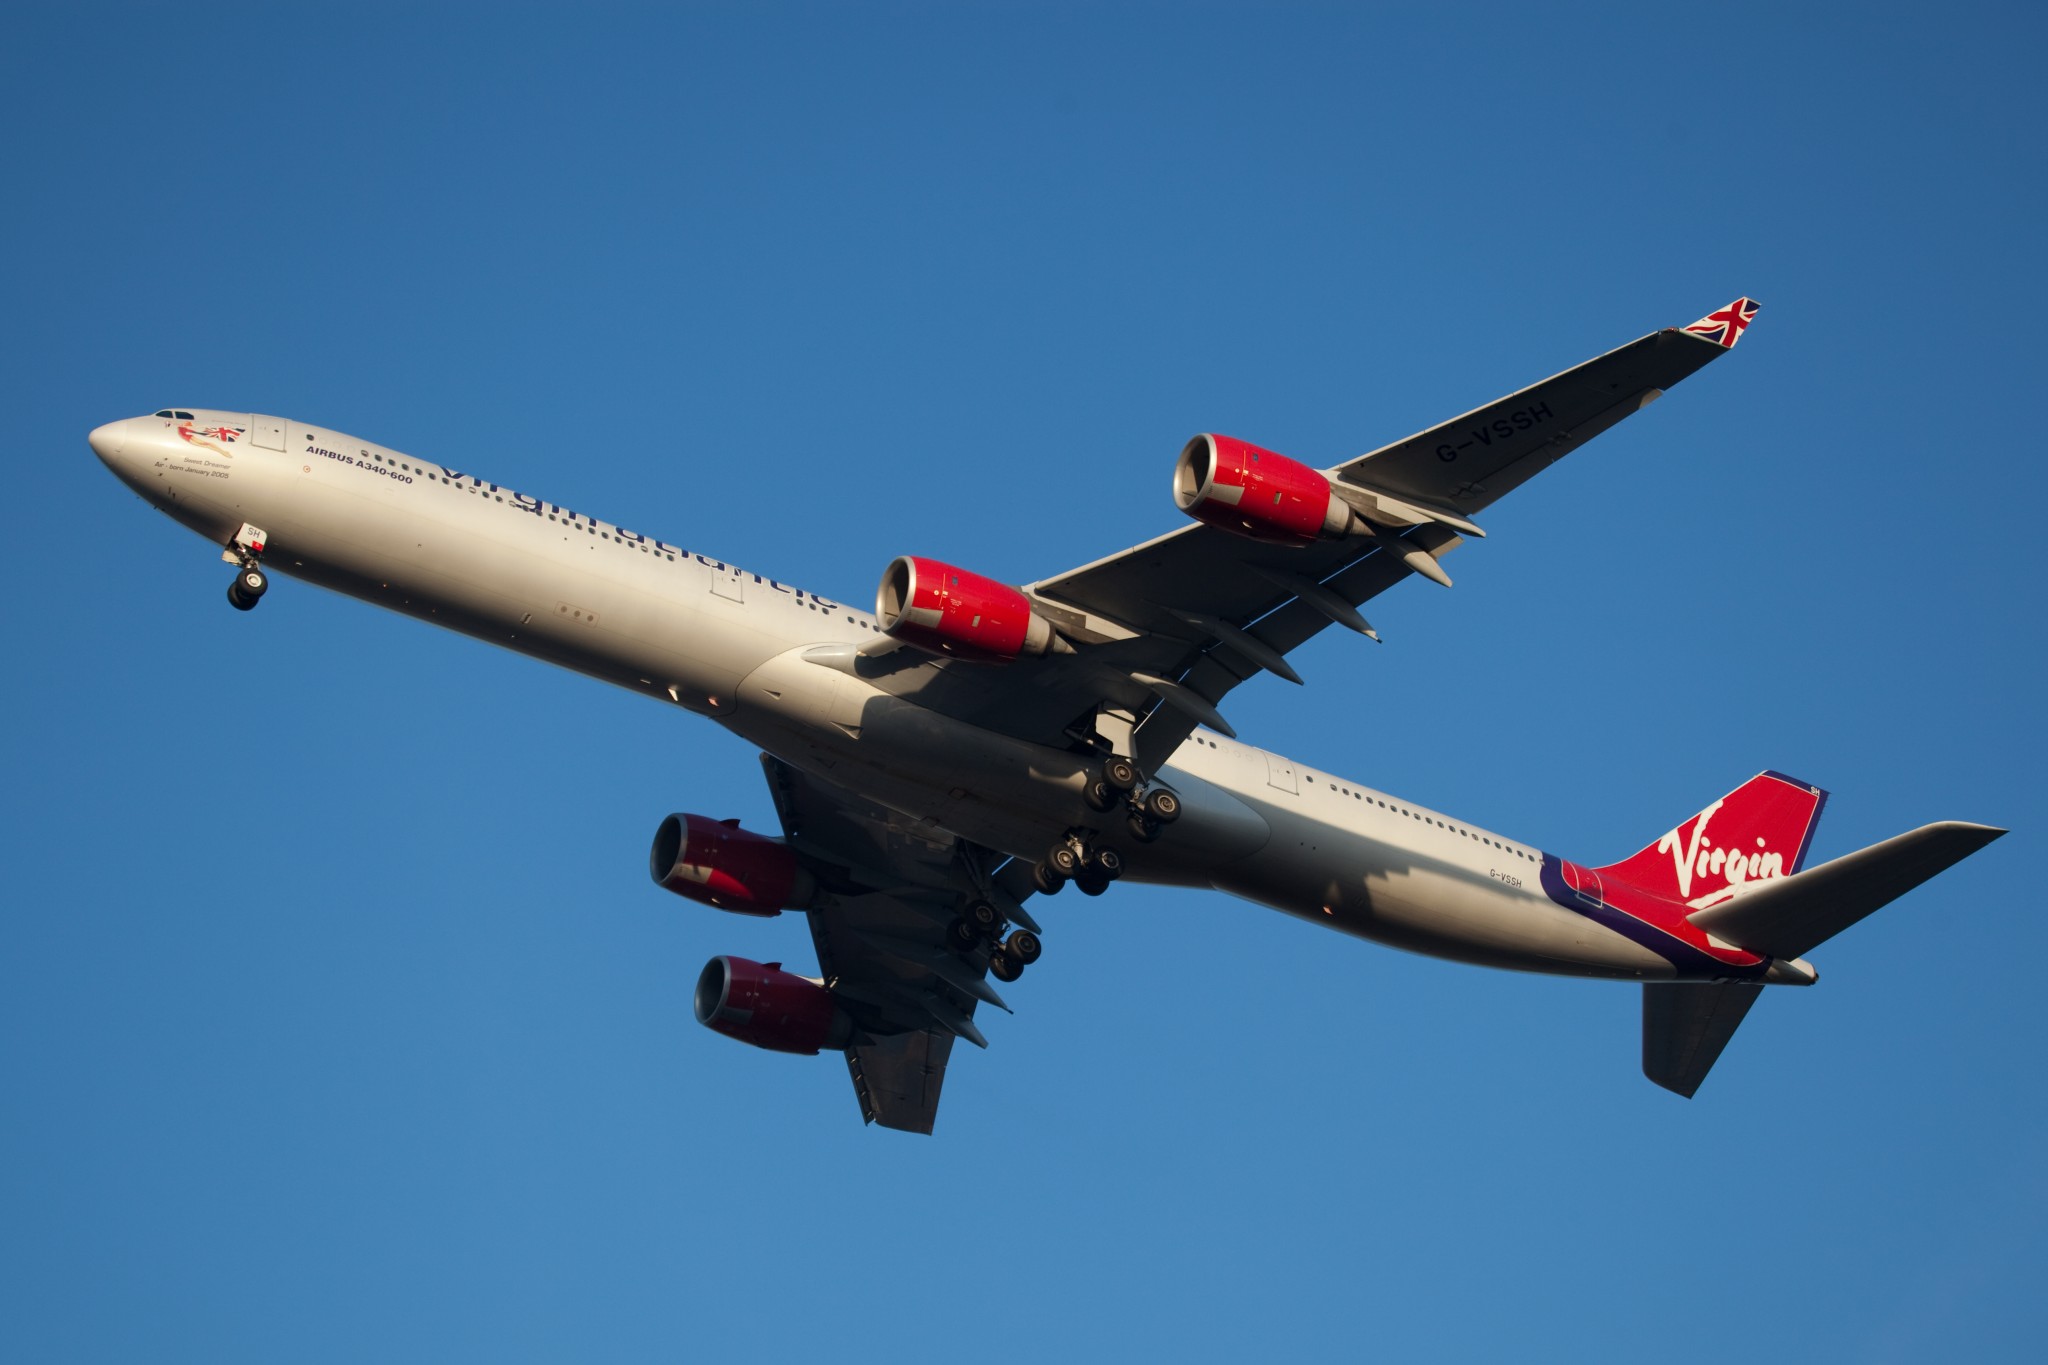 FLY extends leases with Virgin Atlantic